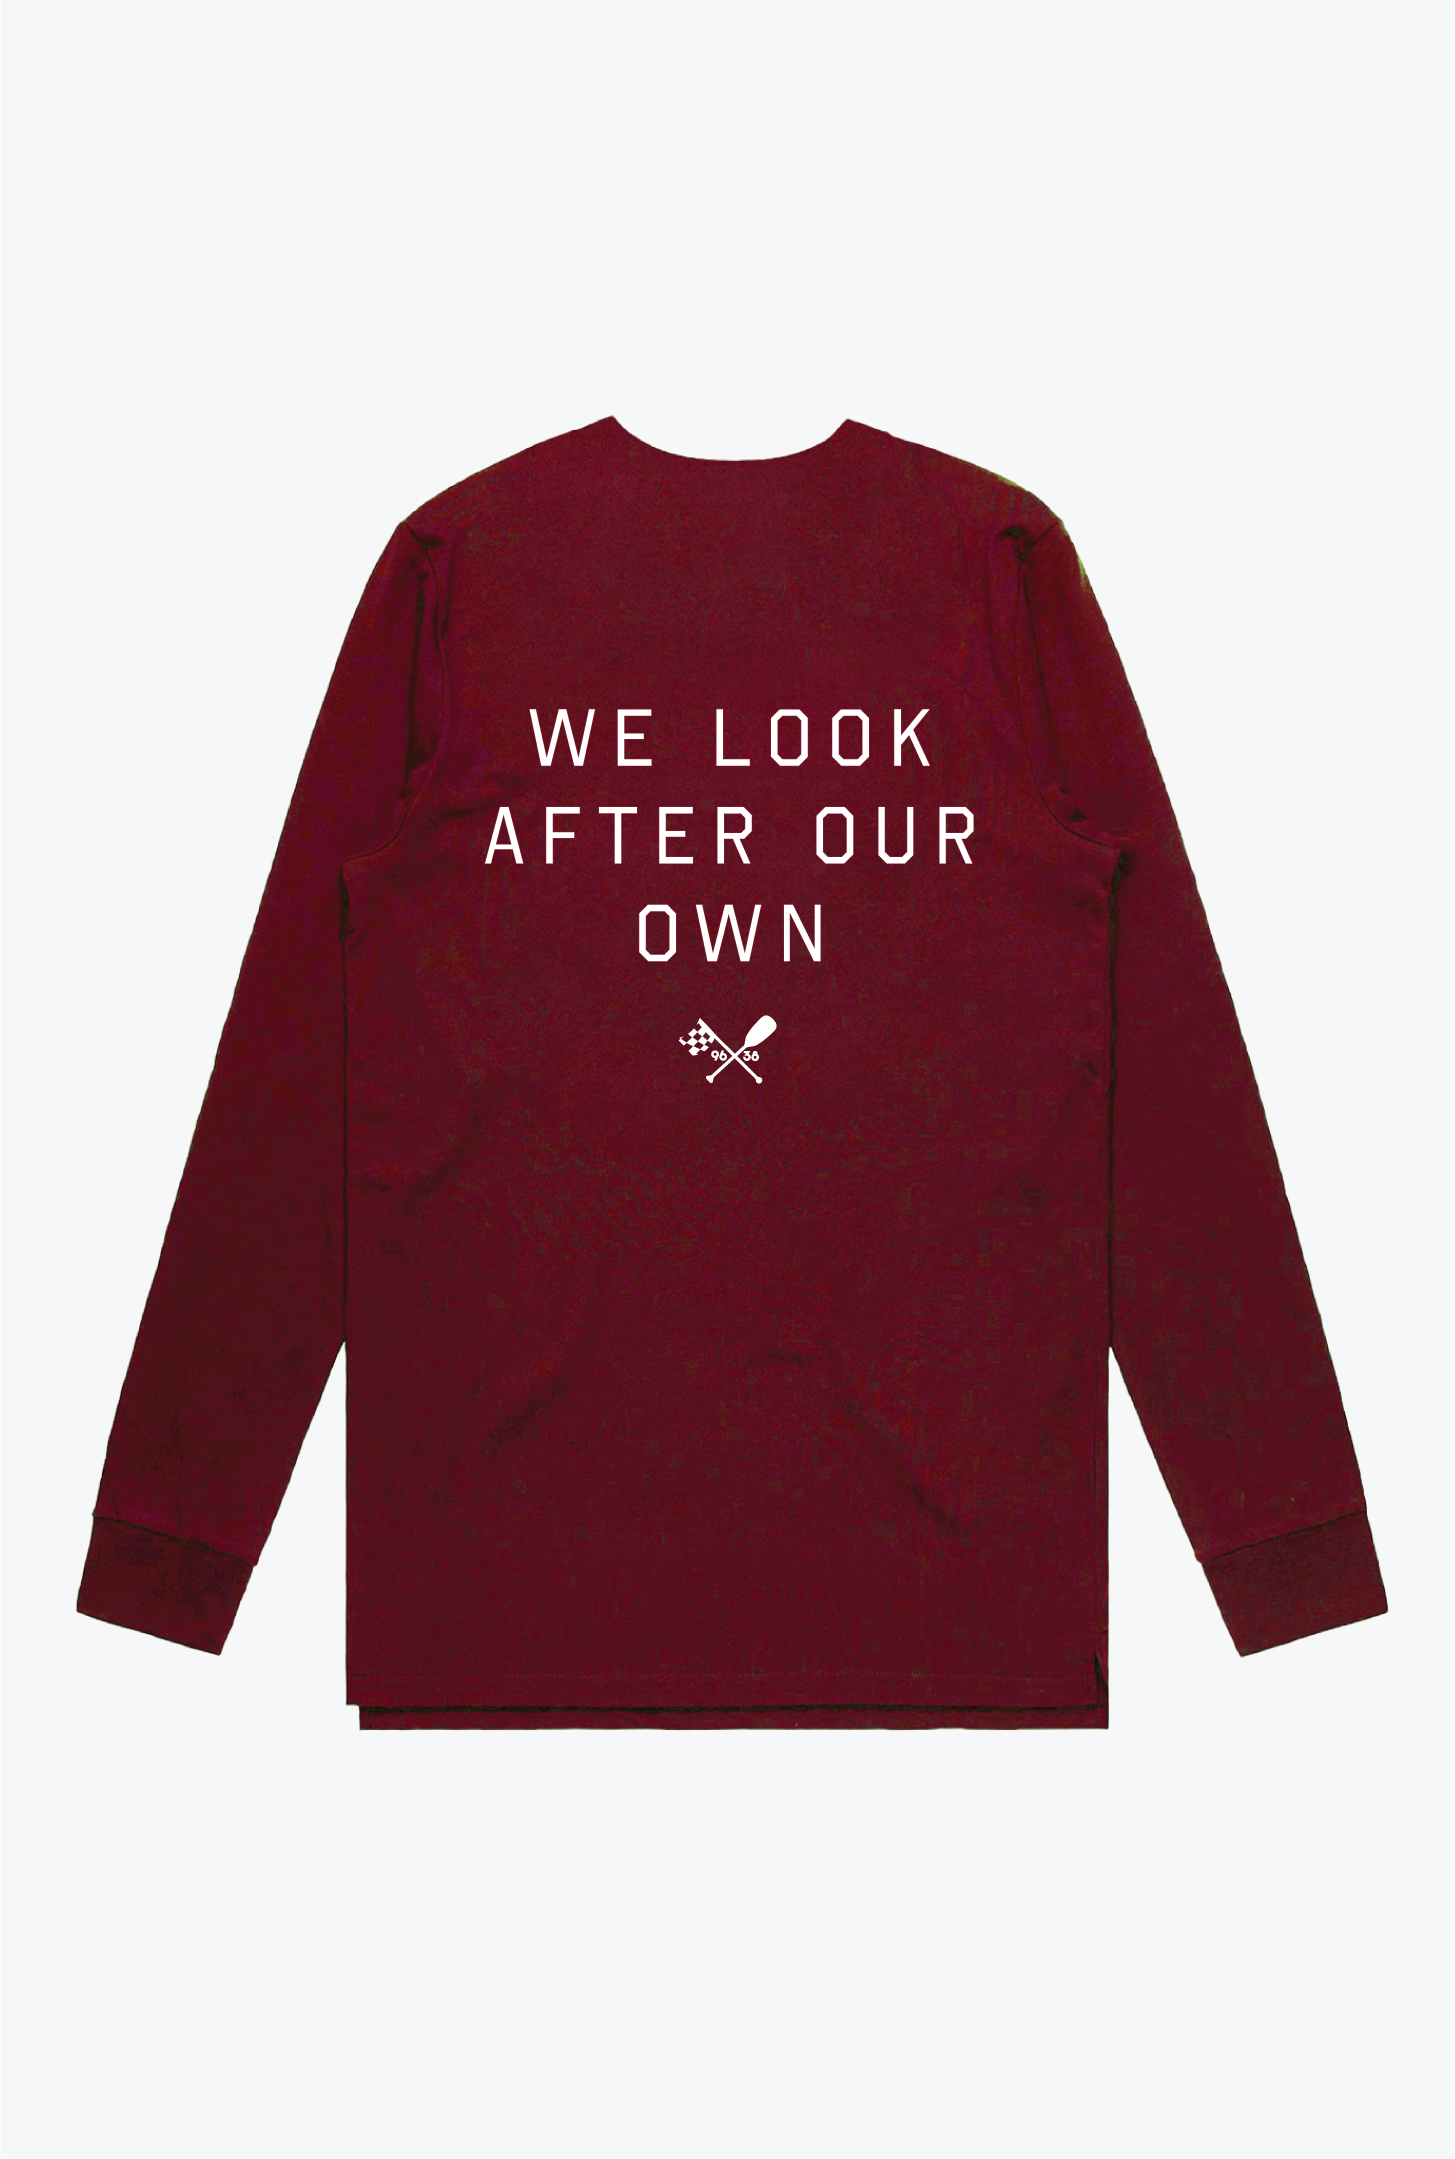 Back of Burgundy Long Sleeve with white print "WE LOOK AFTER OUR OWN"